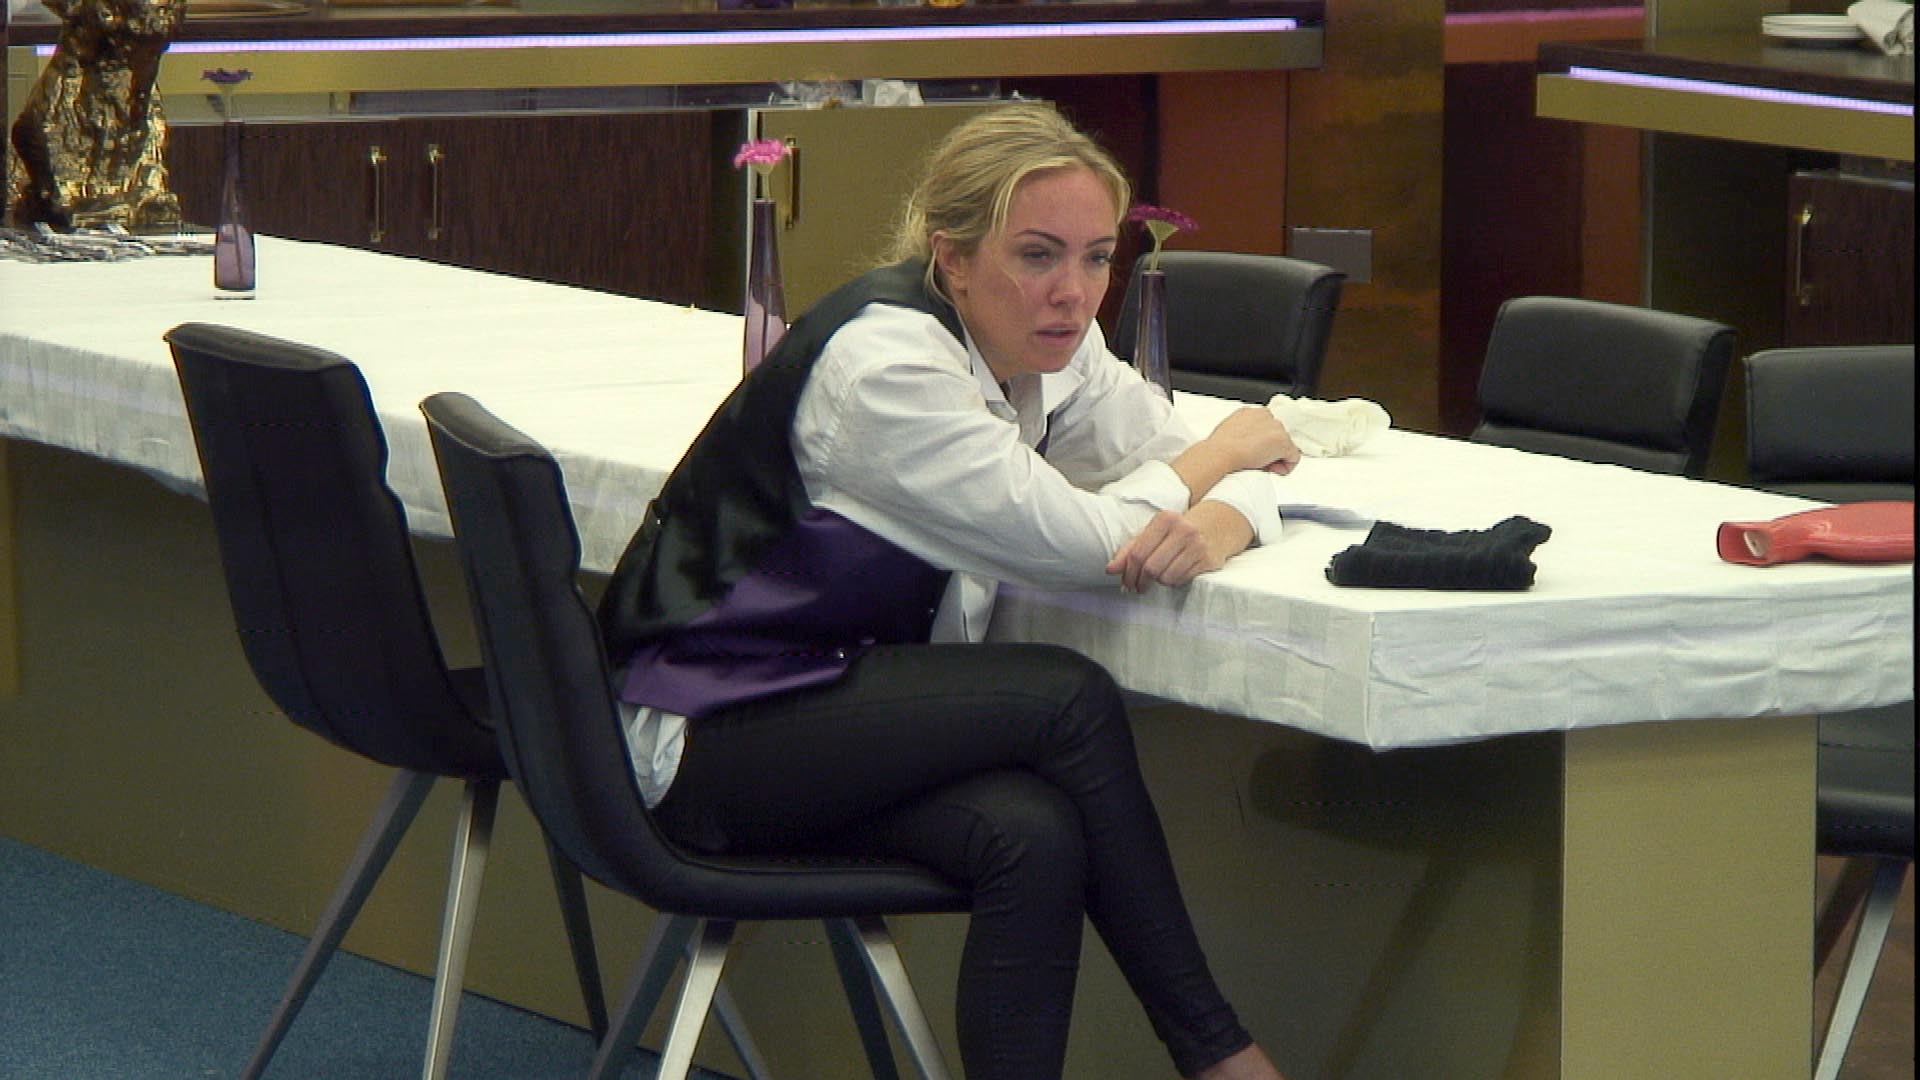 Day 53: Aisleyne attempts to escape from the Big Brother House